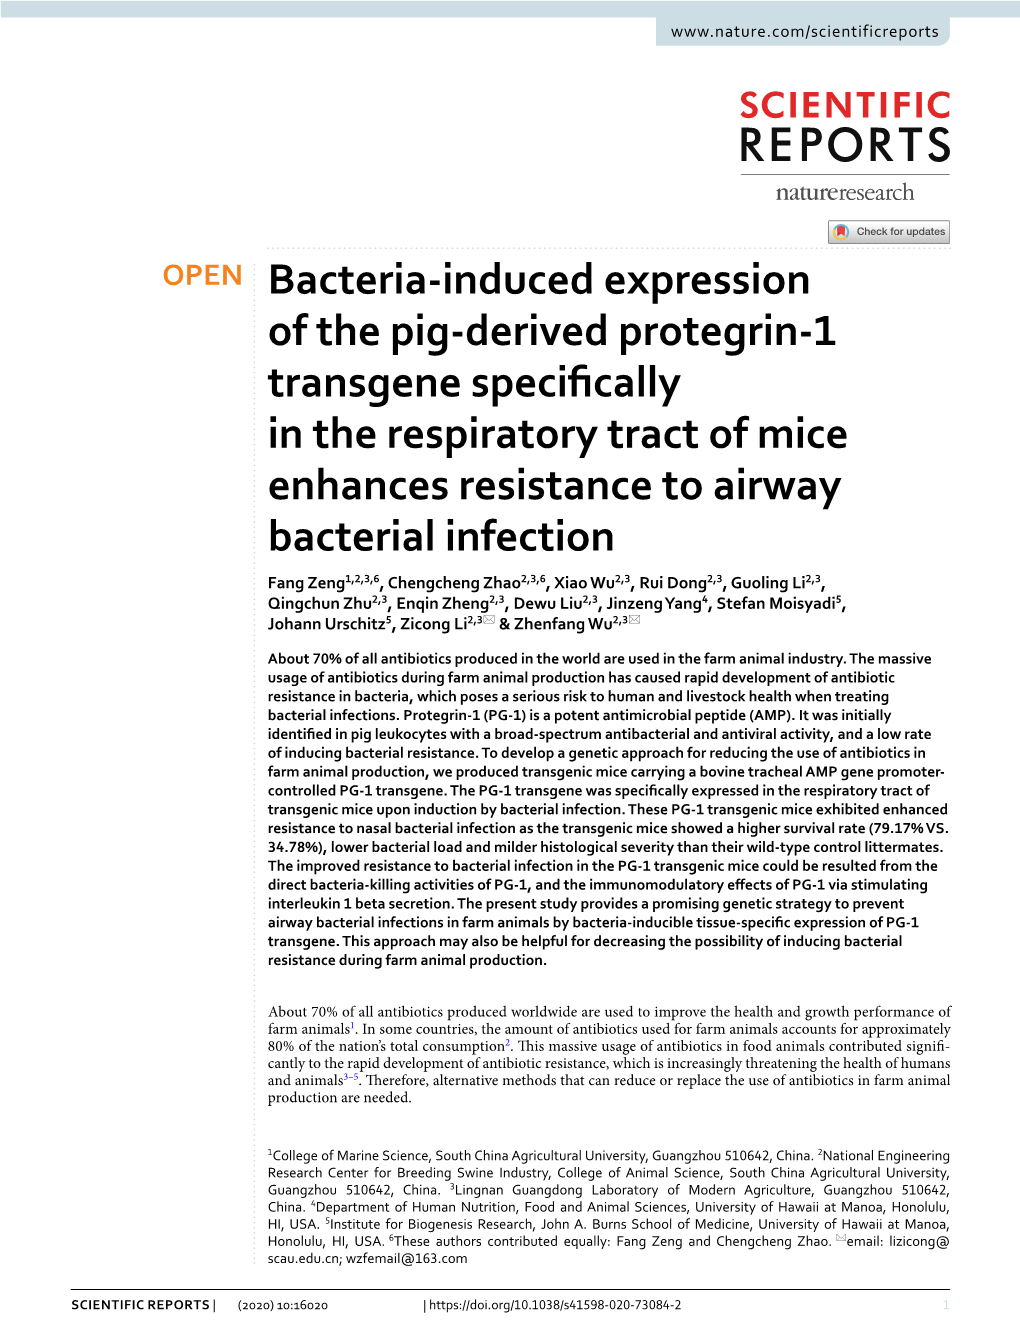 Bacteria-Induced Expression of the Pig-Derived Protegrin-1 Transgene Specifically in the Respiratory Tract of Mice Enhances Resi